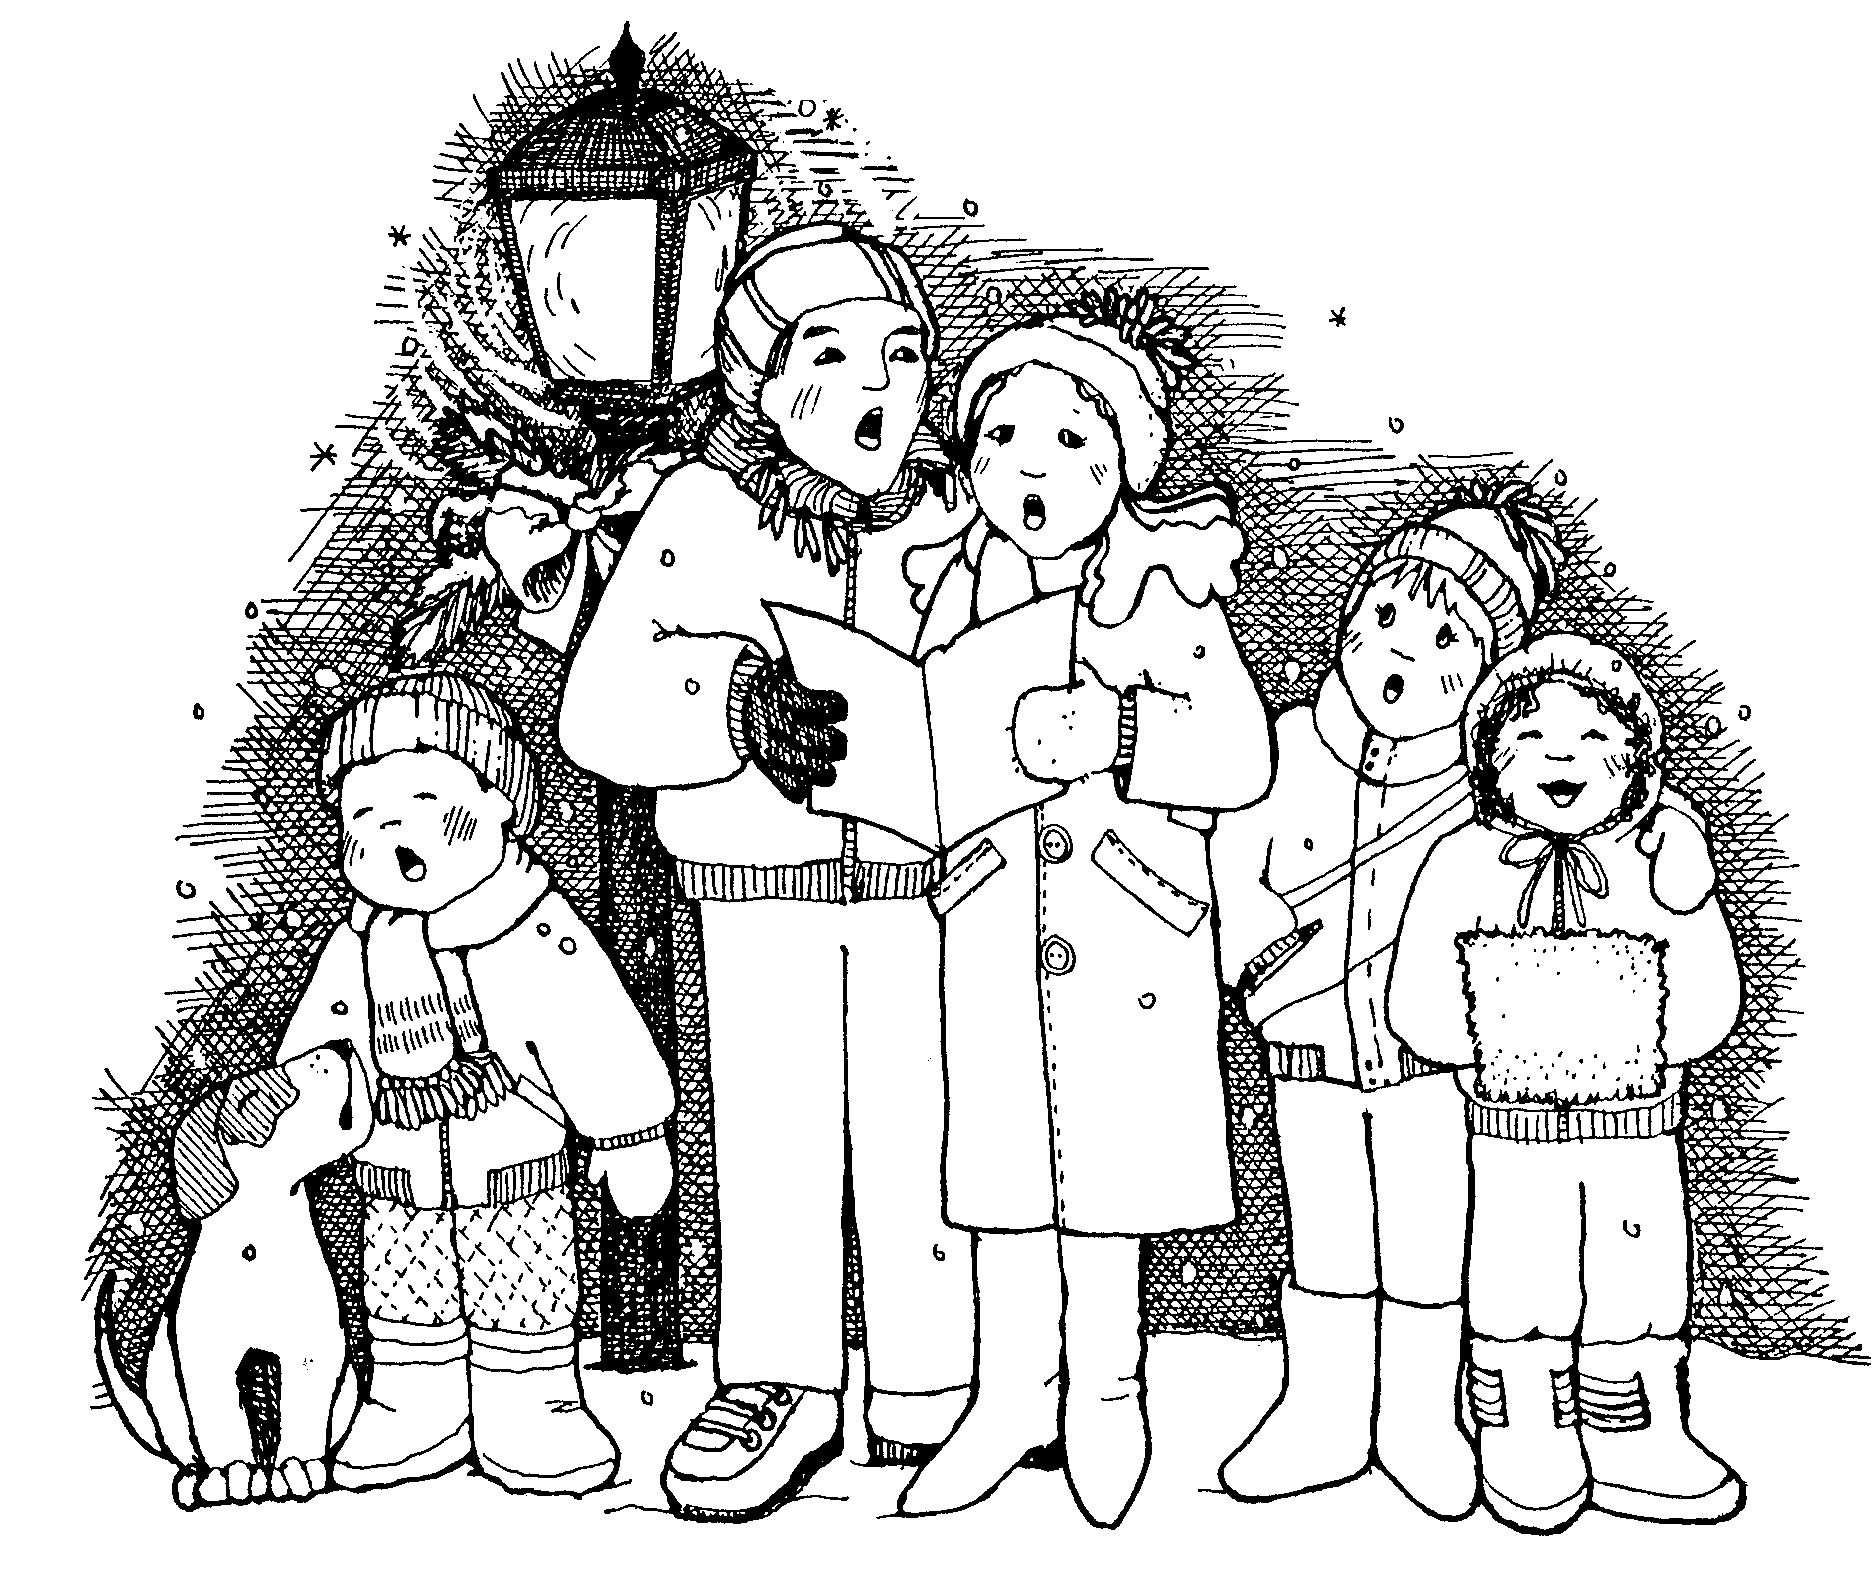 Carolers google search baby. Caroling clipart black and white